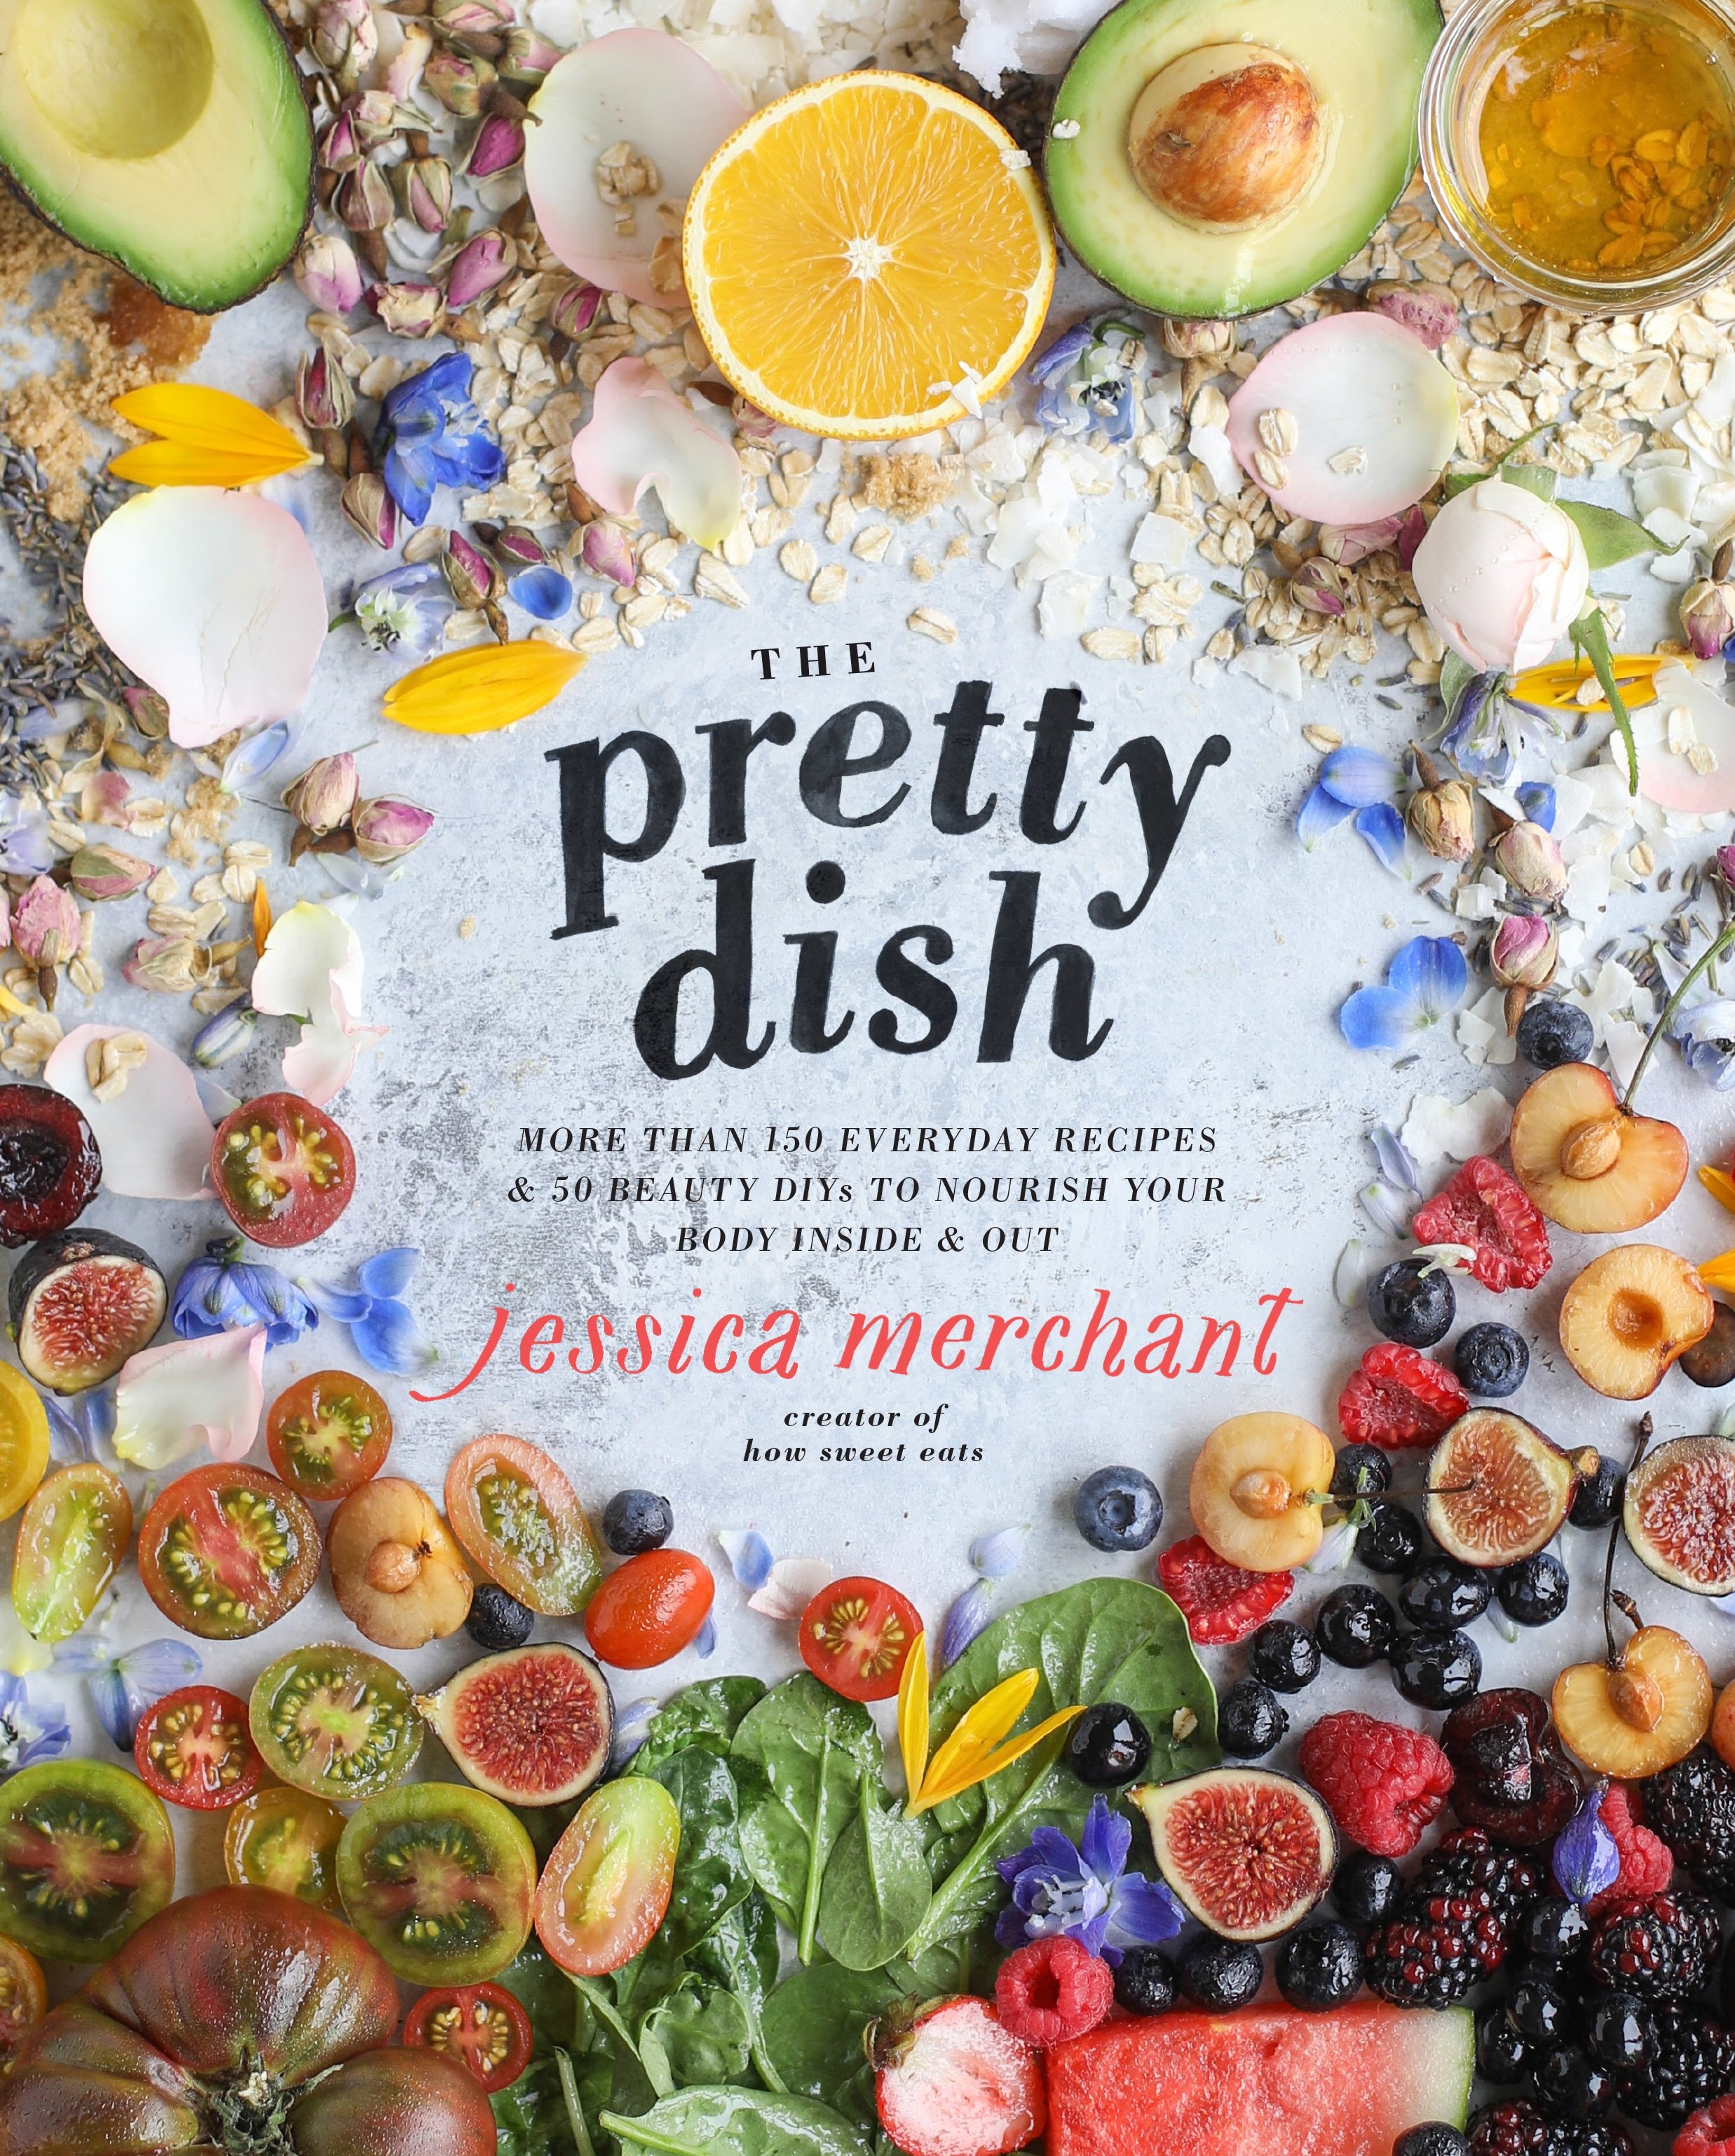 come join us for the pretty dish book club in november I howsweeteats.com #theprettydish #bookclub